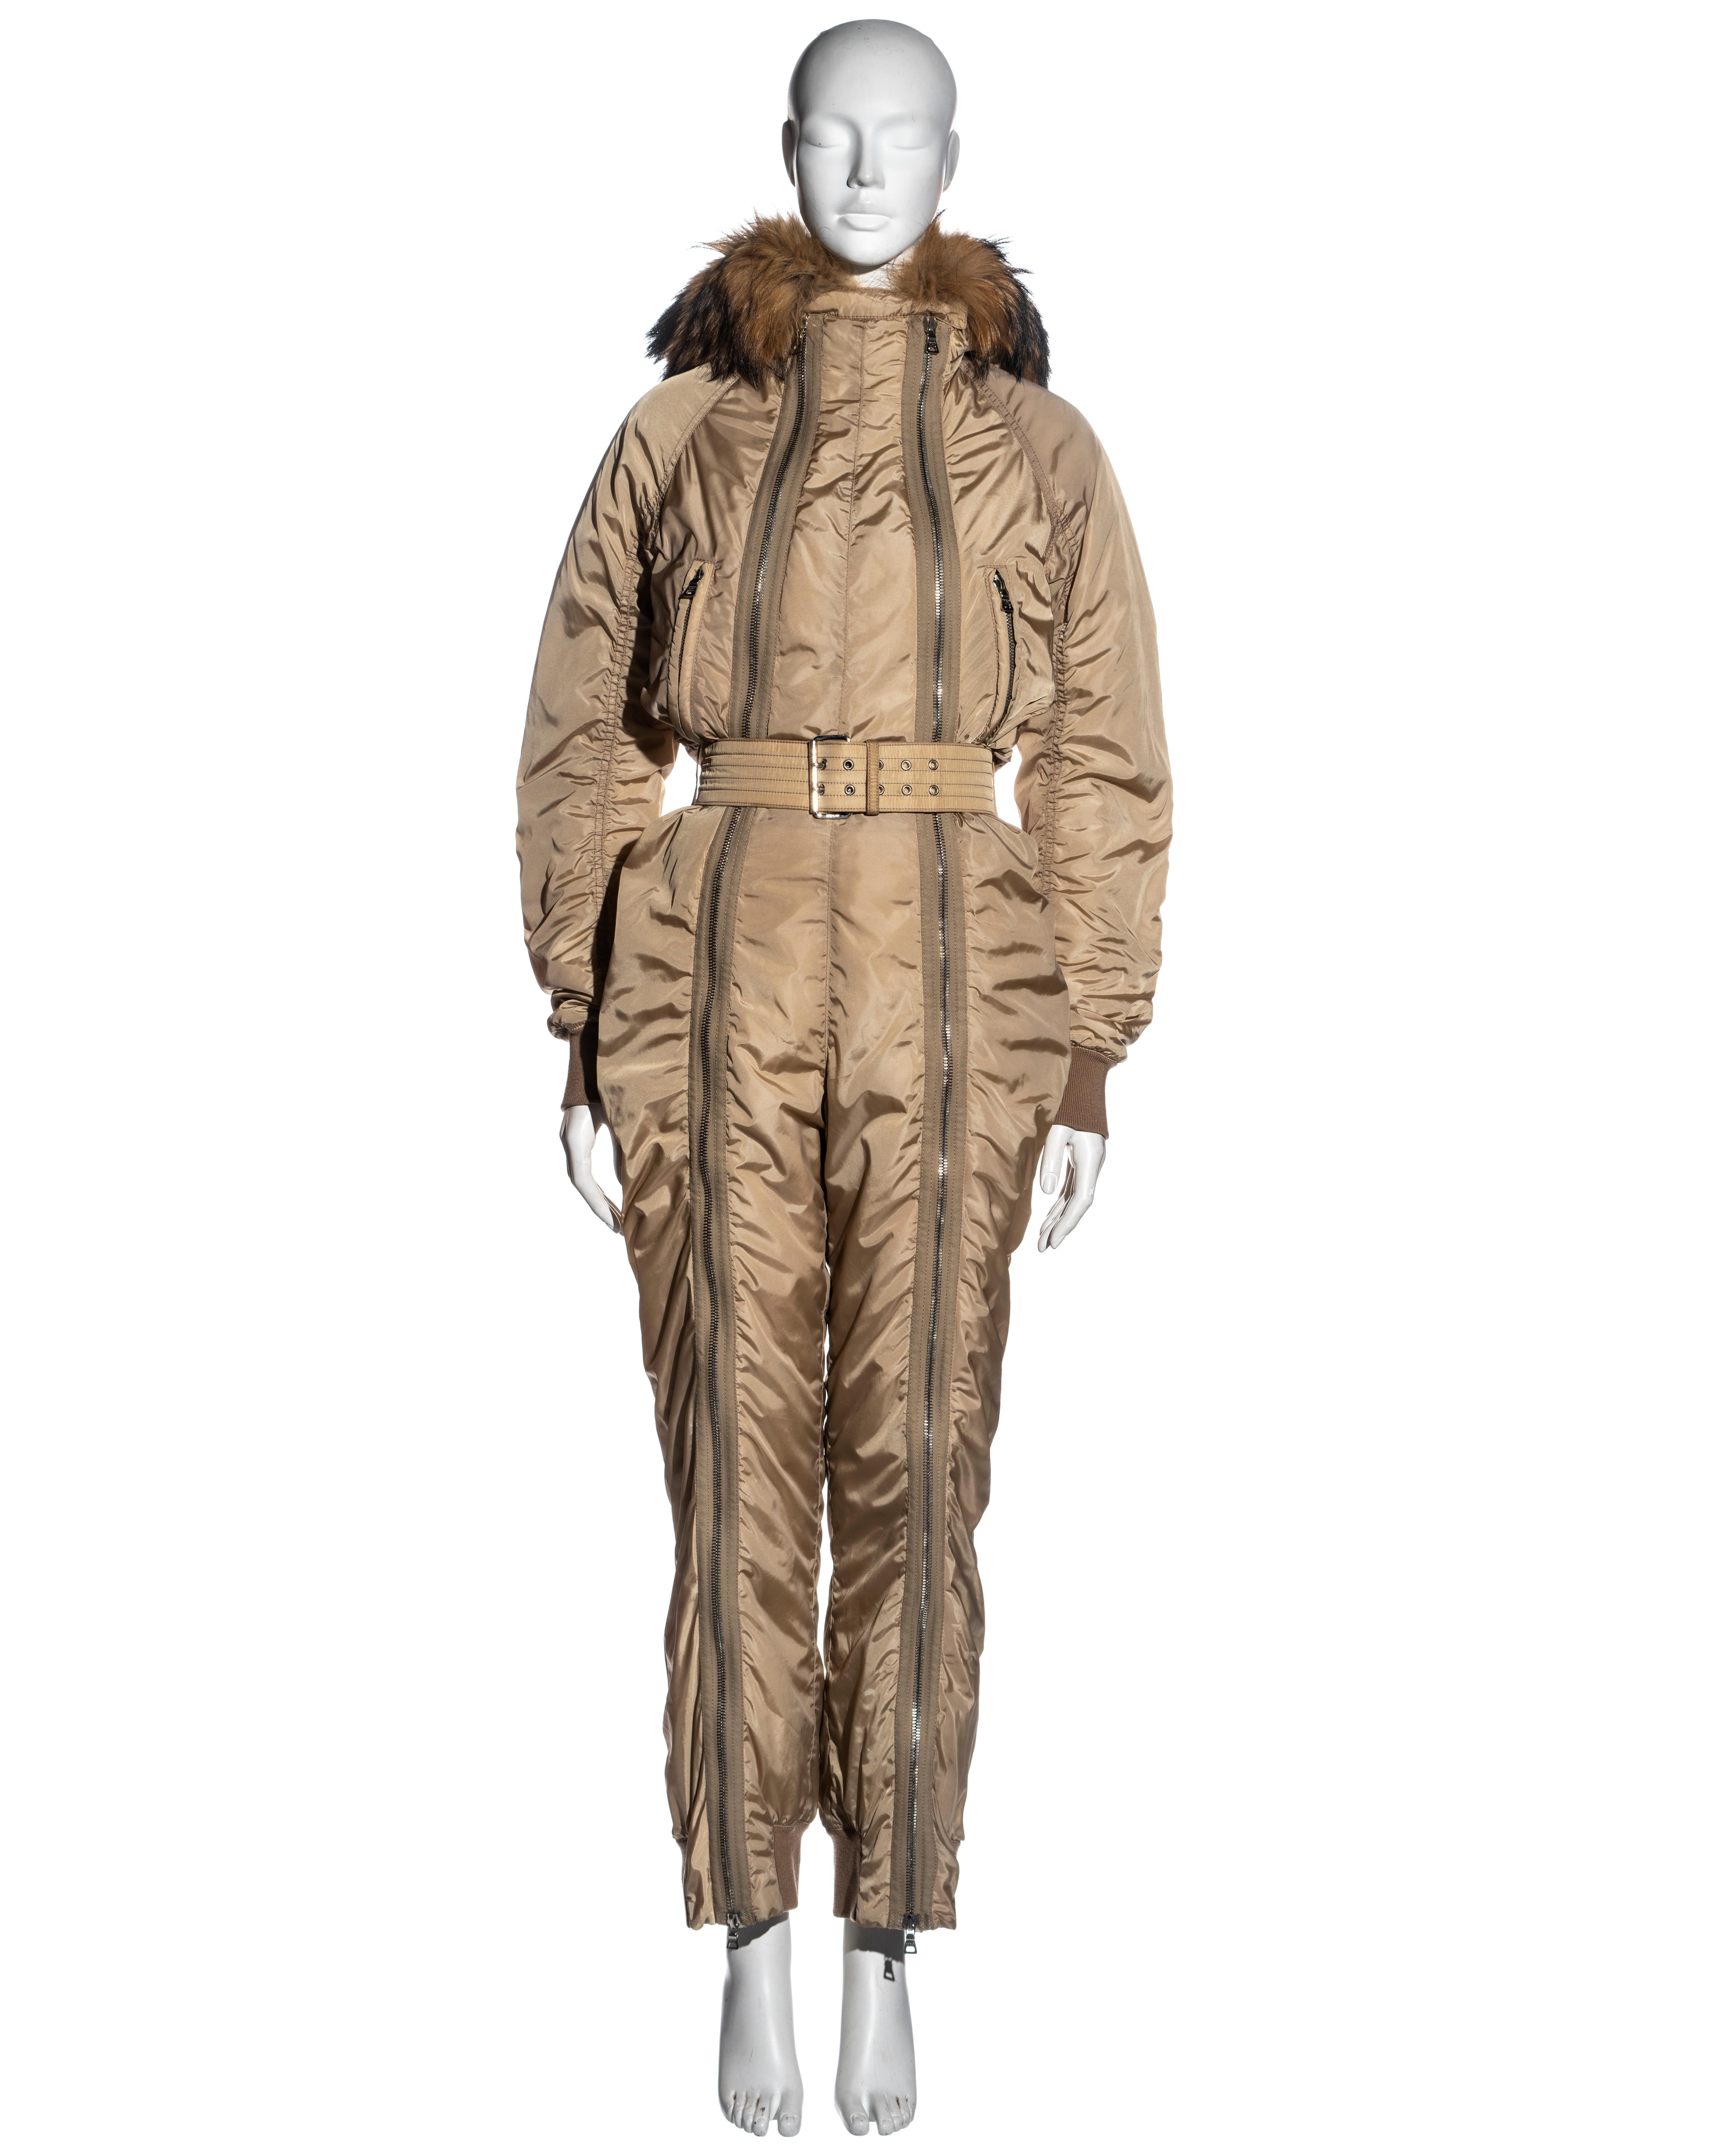 ▪ Prada Linea Rossa sand padded nylon ski suit
▪ Padded nylon
▪ Raccoon fur hood with shearling lining
▪ Two full-length double-ended zippers running from the neck to the ankles
▪ Matching belt
▪ Ribbed-wool cuffs and ankles
▪ Size 38
▪ Fall-Winter